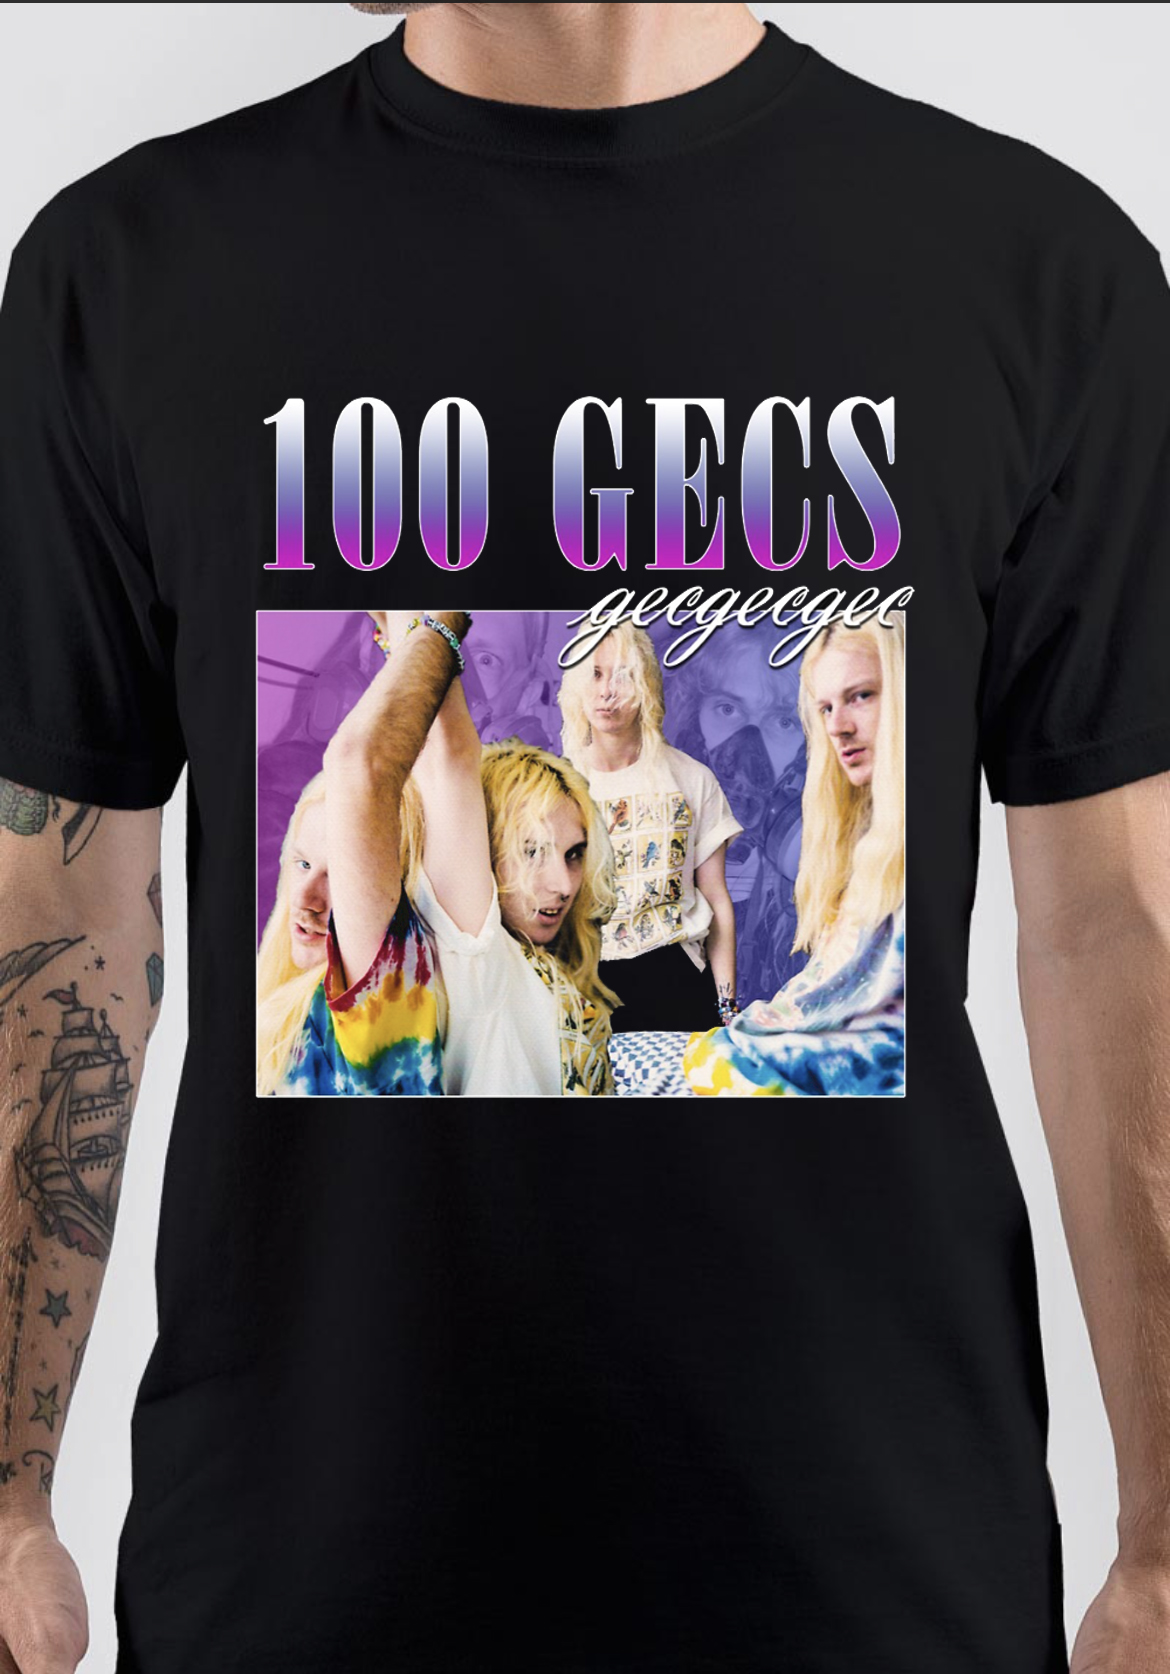 100 Gecs TShirt And Merchandise Archives Swag Shirts